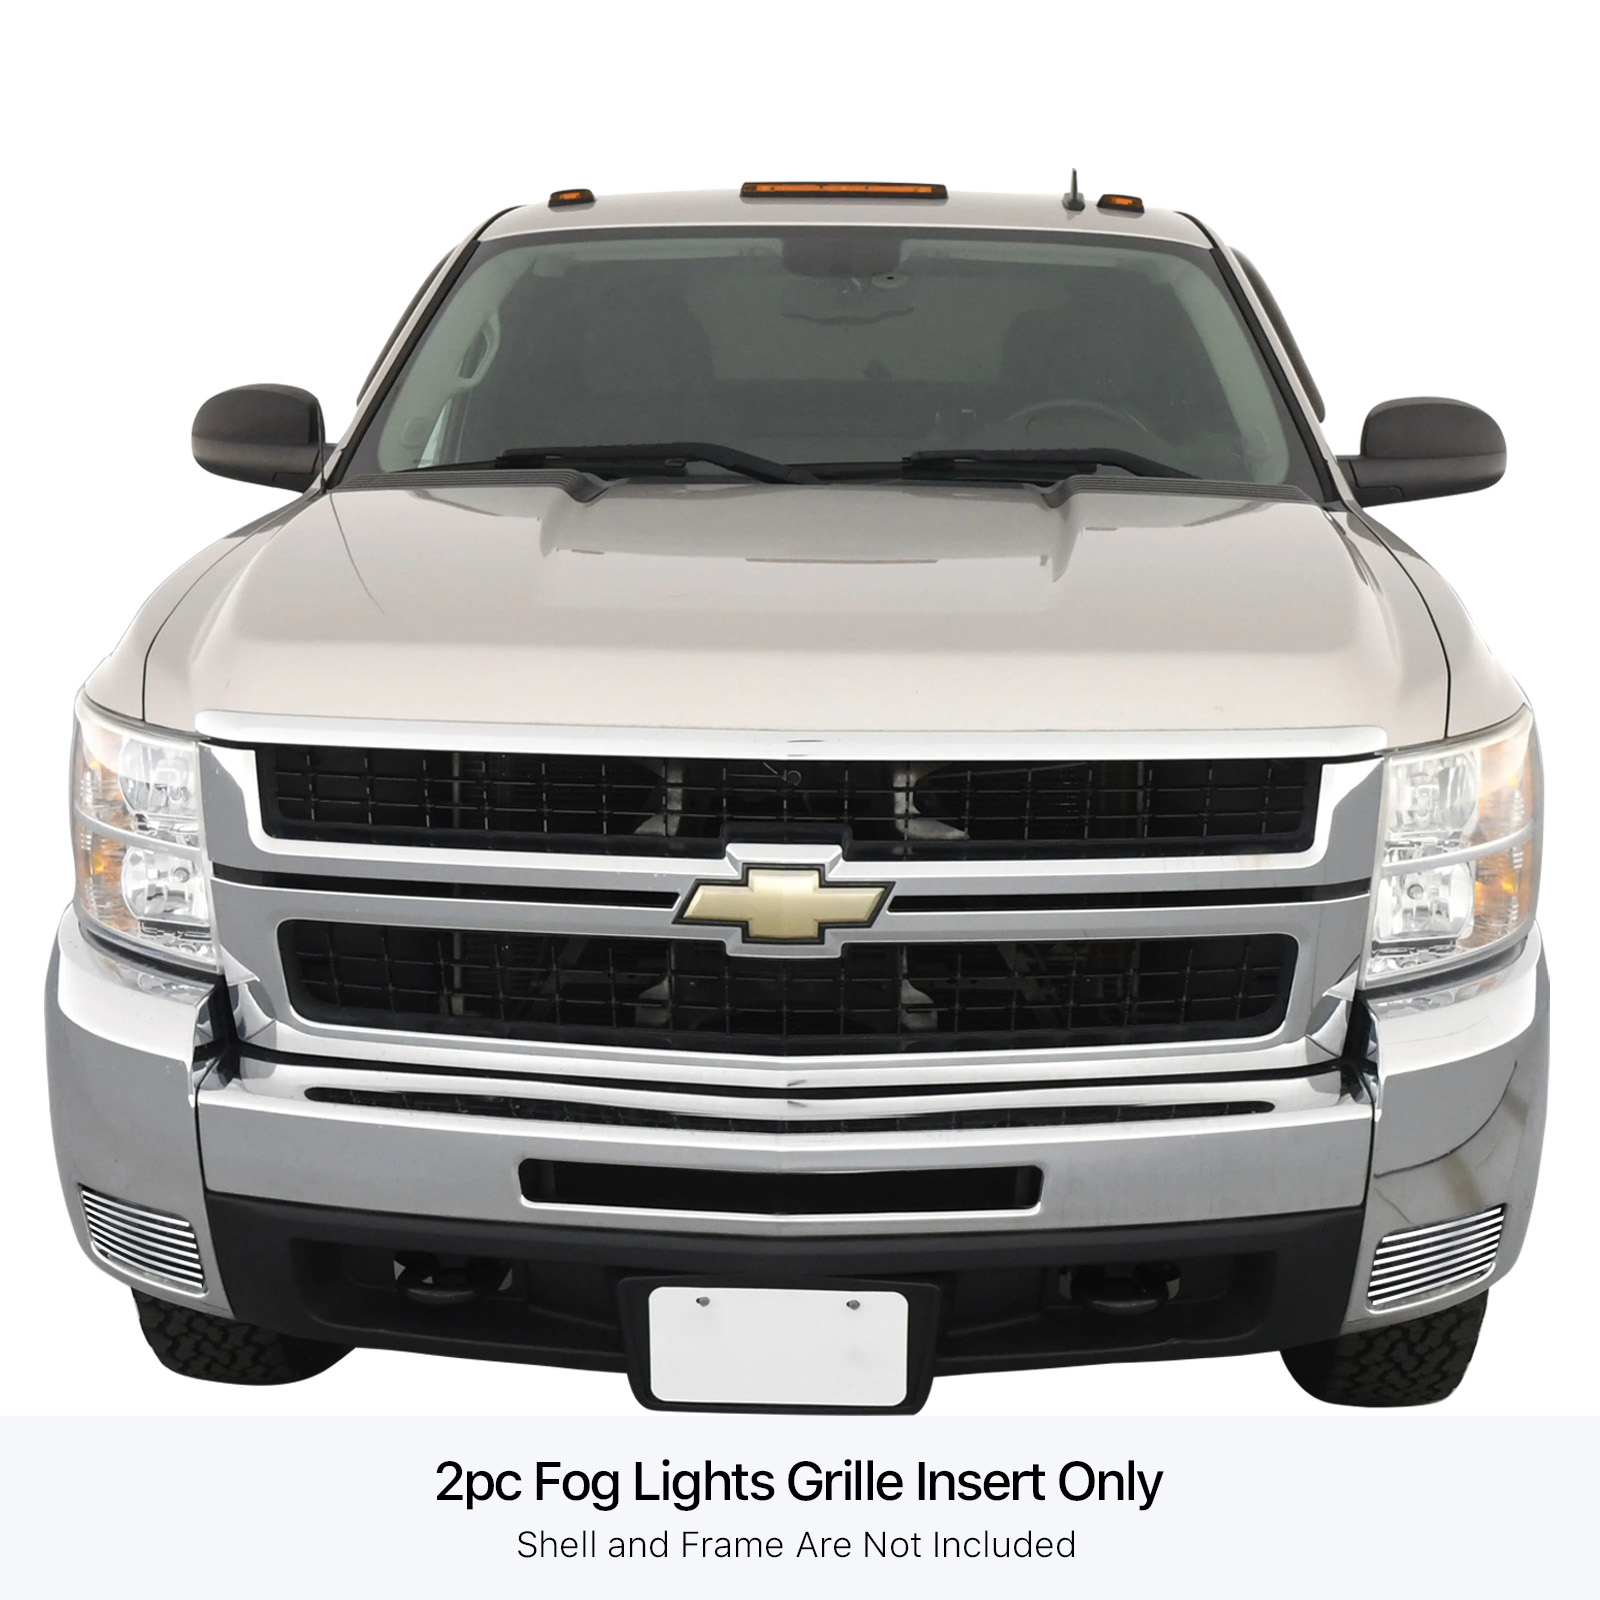 2007-2013 Chevy Silverado 1500 FOG LIGHT COVER Stainless Steel Billet Grille